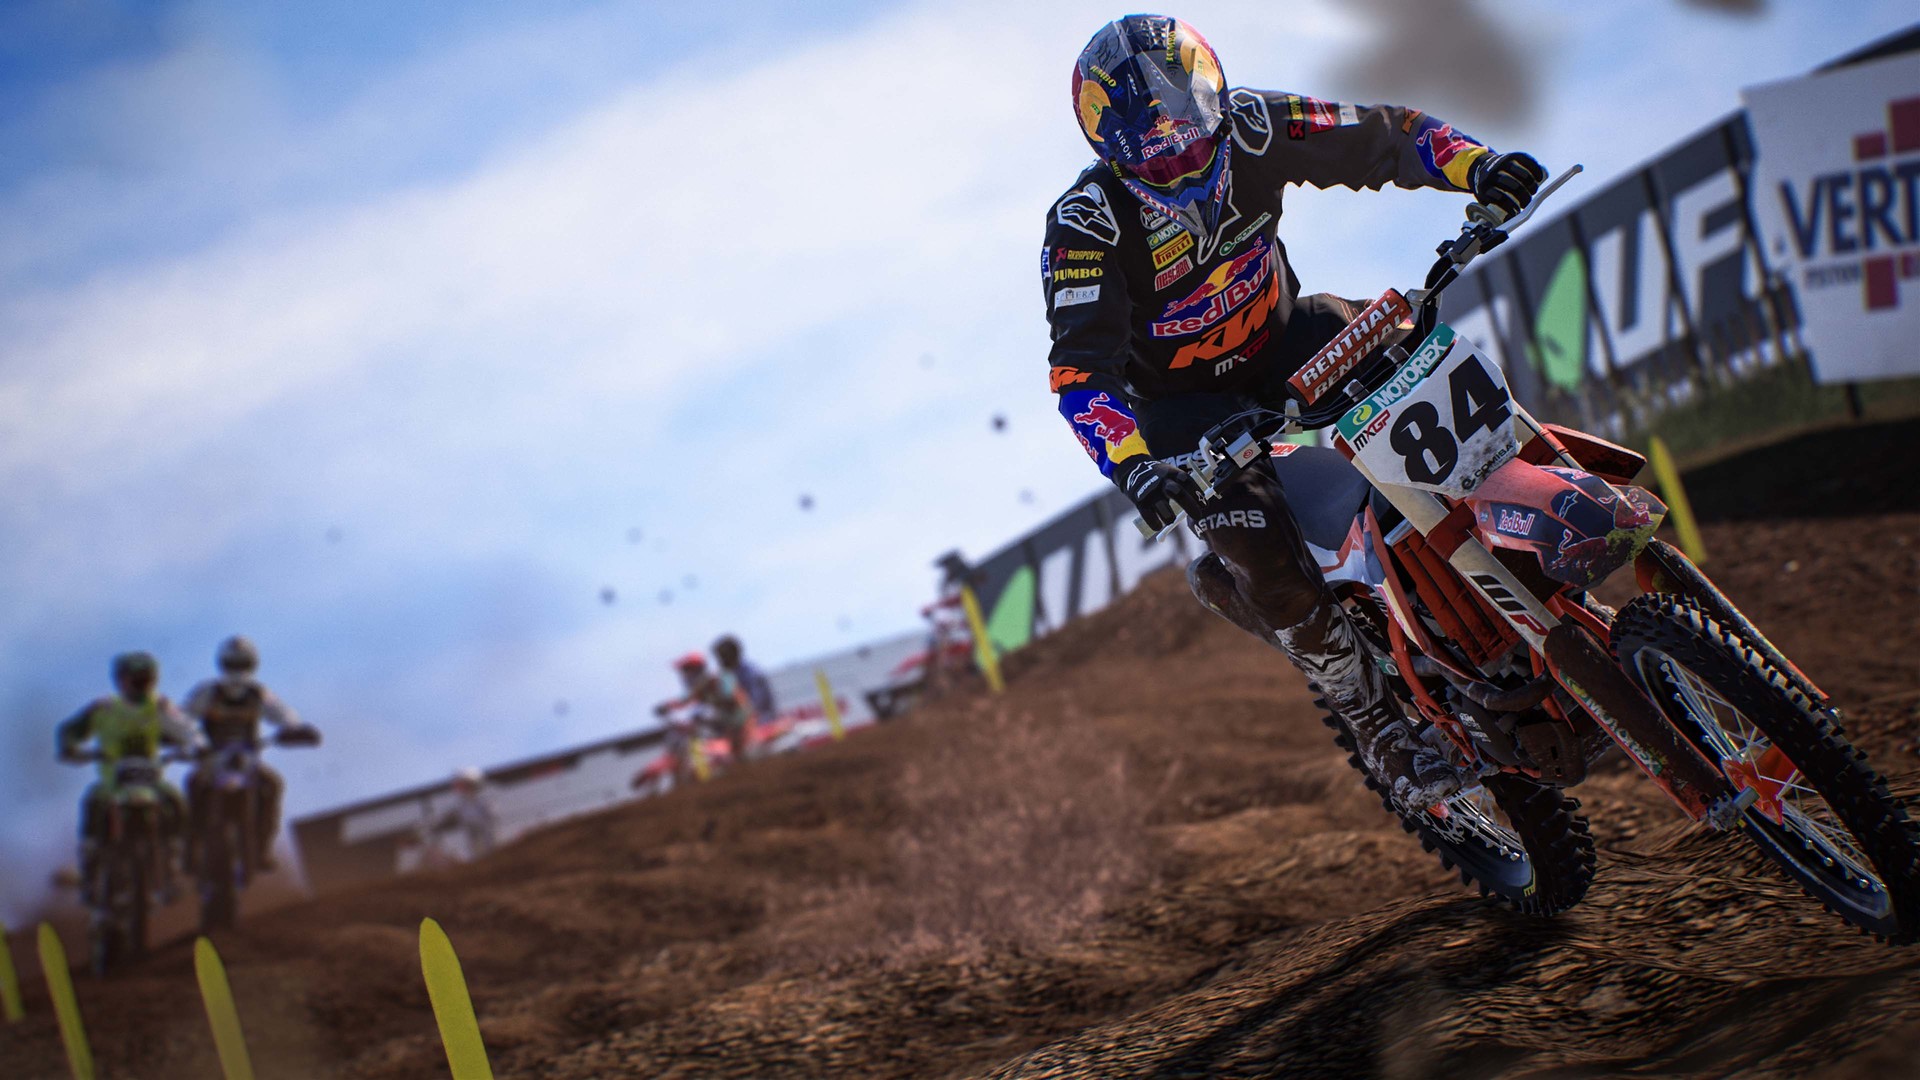 MXGP 2021 - The Official Motocross Videogame on Steam